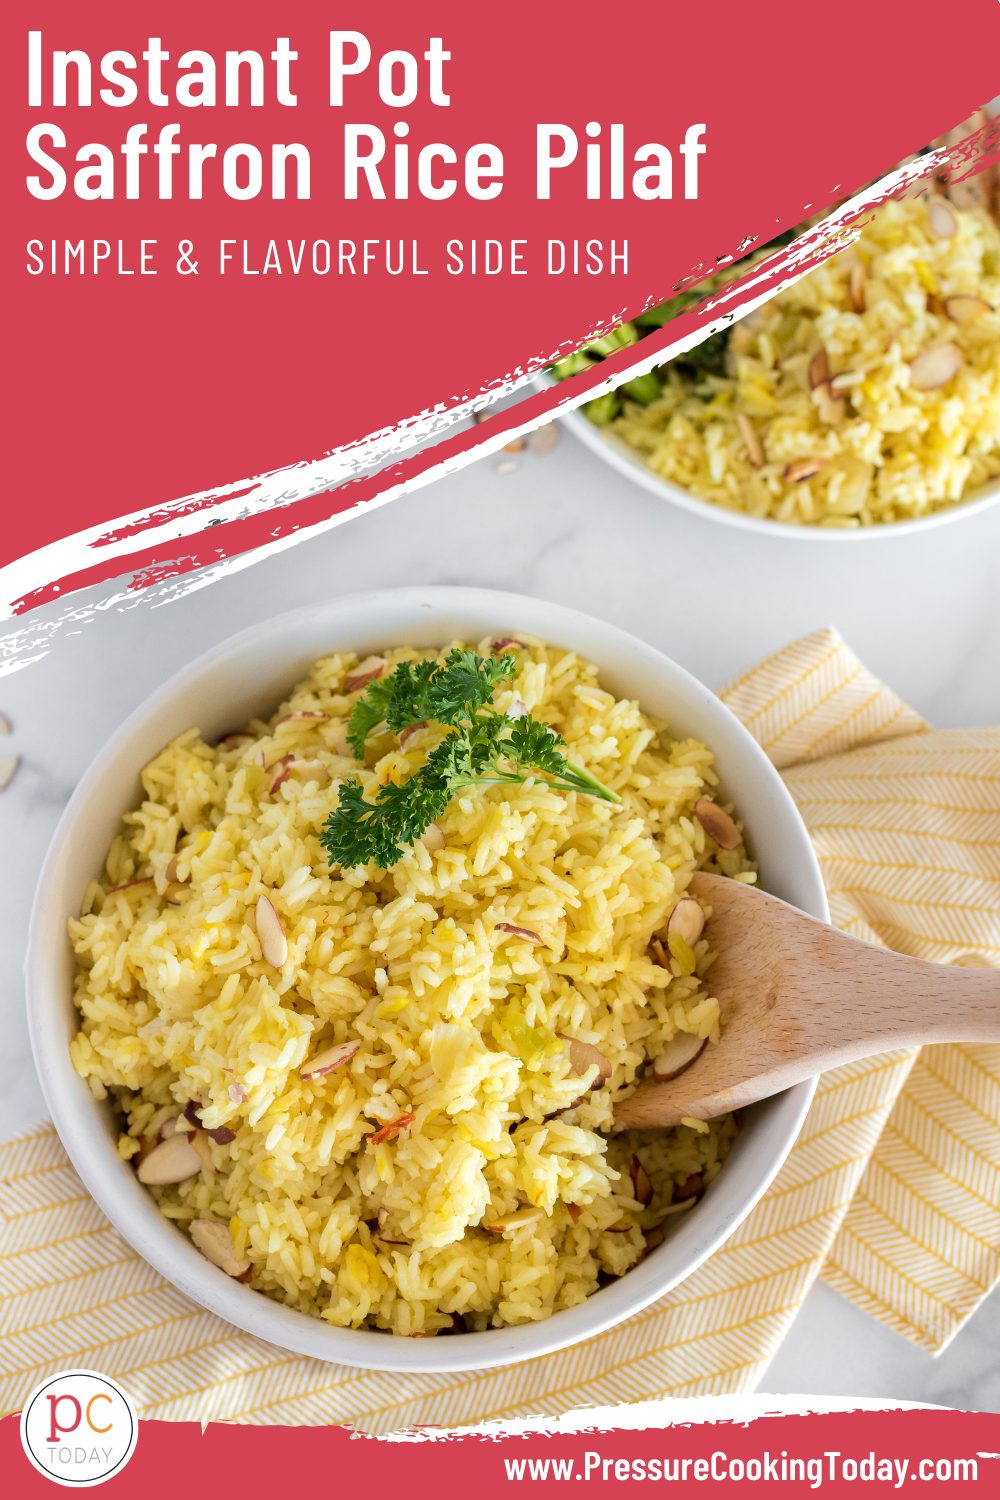 Instant Pot Rice Pilaf, made with a beautiful saffron broth, toasted almonds, and long grain white, is the perfect quick and easy side dish. We love to serve it with a simple grilled protein. #PressureCookingToday via @PressureCook2da